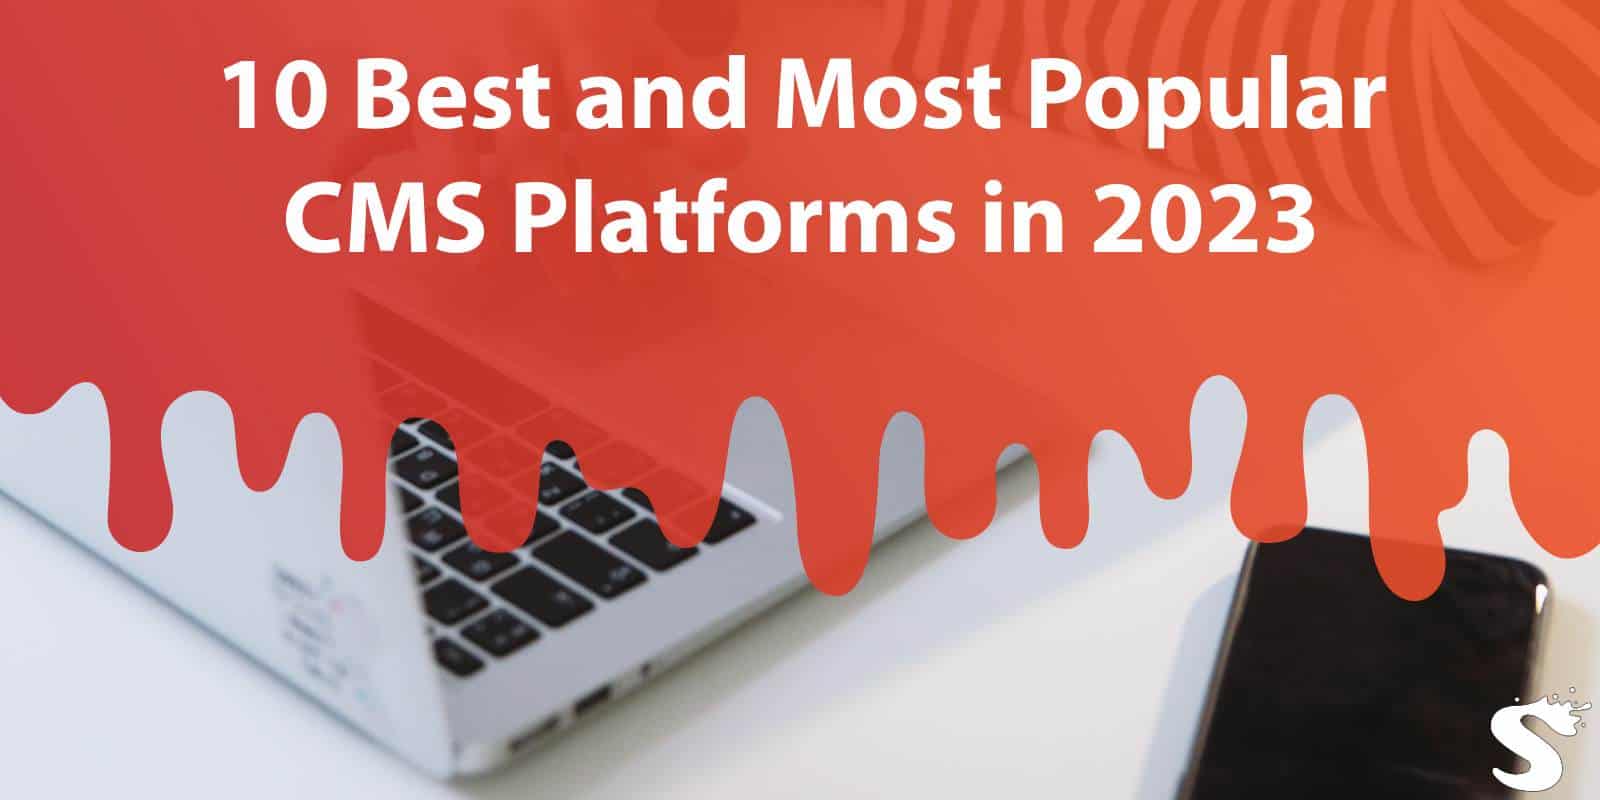 10 Best and Most Popular CMS Platforms in 2023